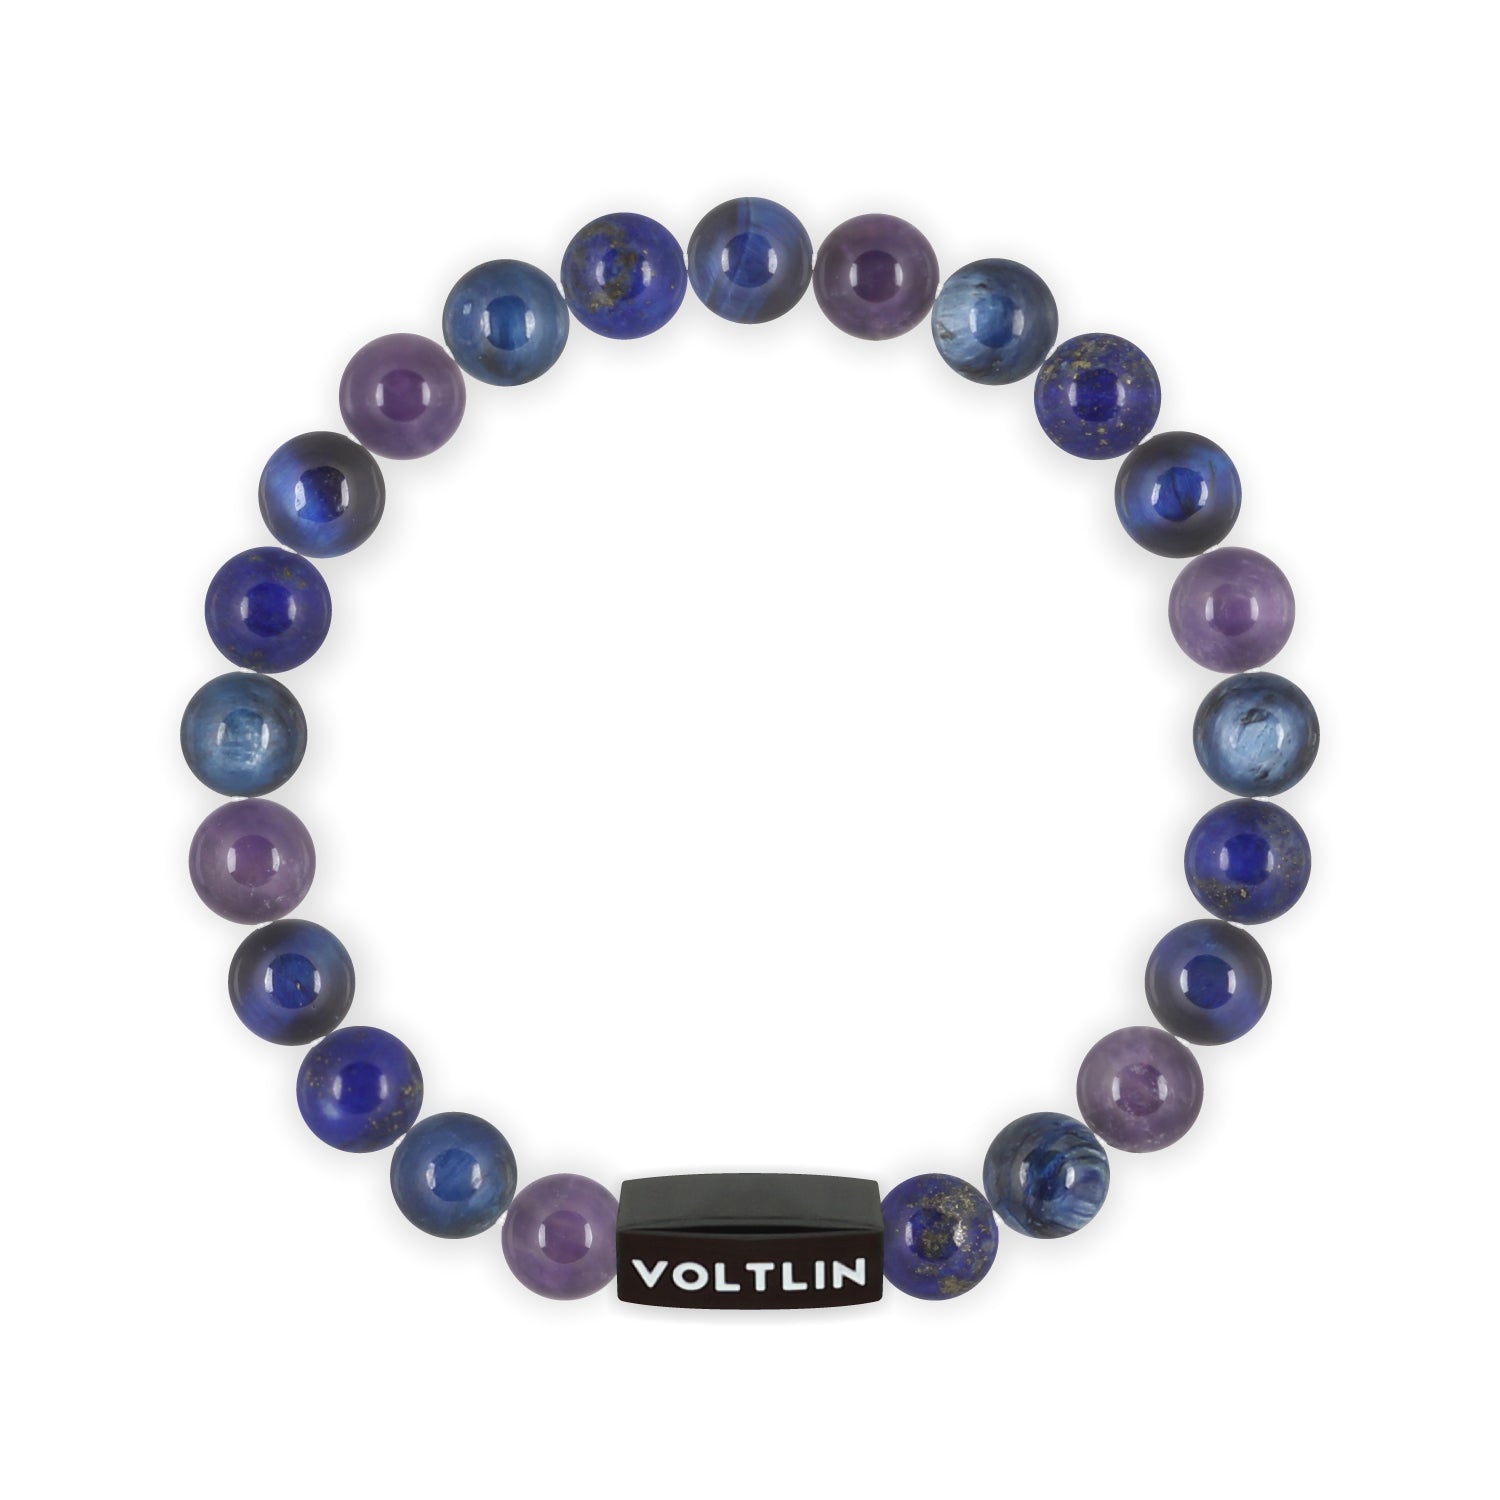 Front view of an 8mm Third Eye Chakra crystal beaded stretch bracelet with black stainless steel logo bead made by Voltlin